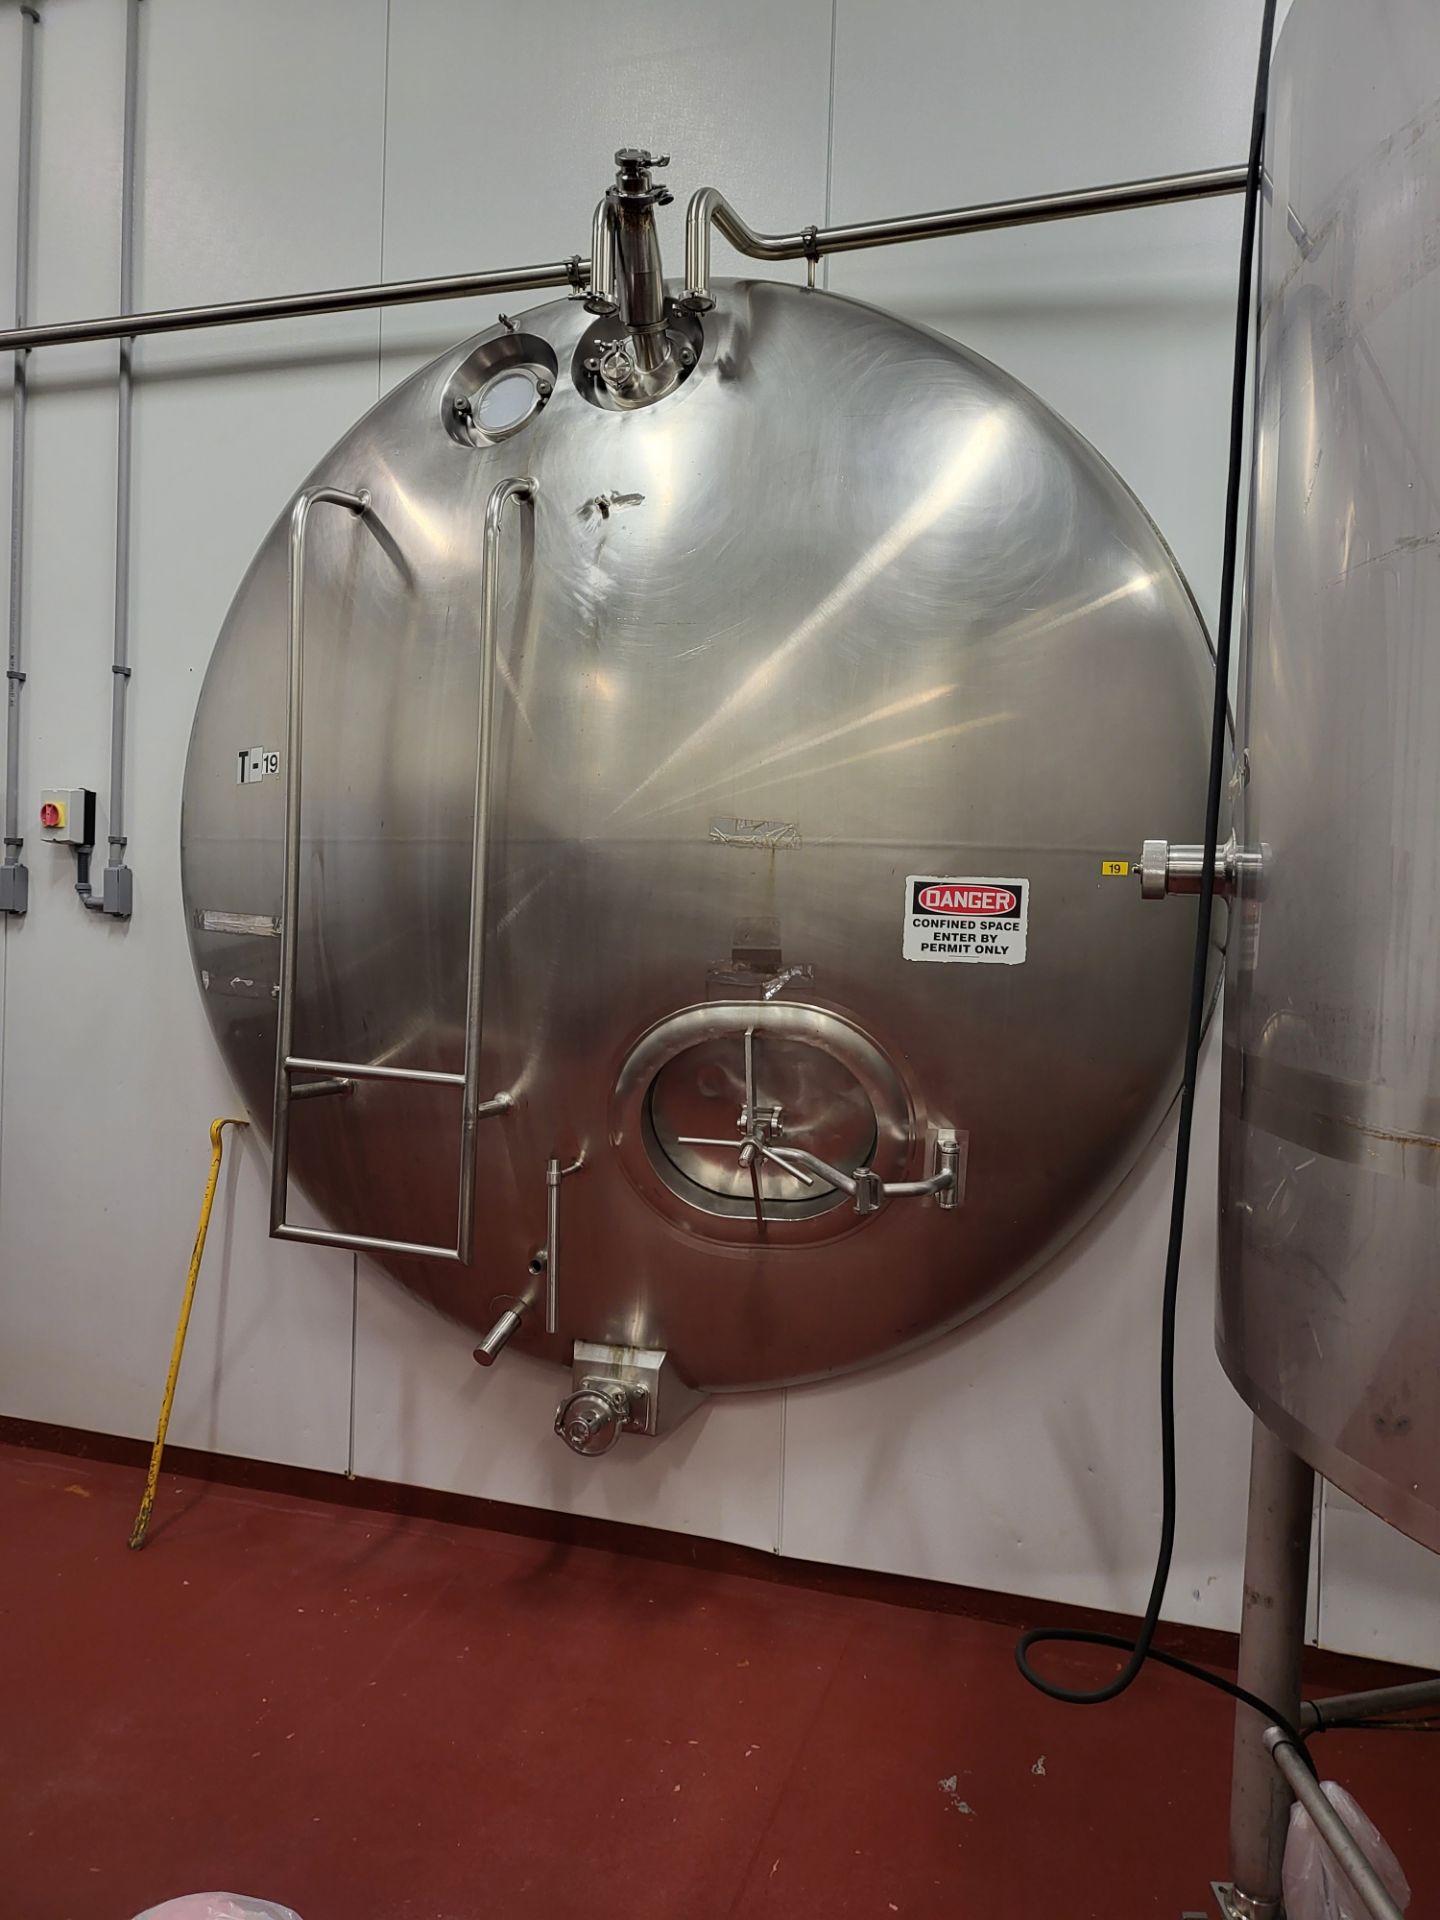 CREPACO 6,000 GALLON HORIZONTAL TANK, S/S FRONT (LOCATED LEOMINSTER, MA) (NOTE: NOT JACKETED) - Image 4 of 4